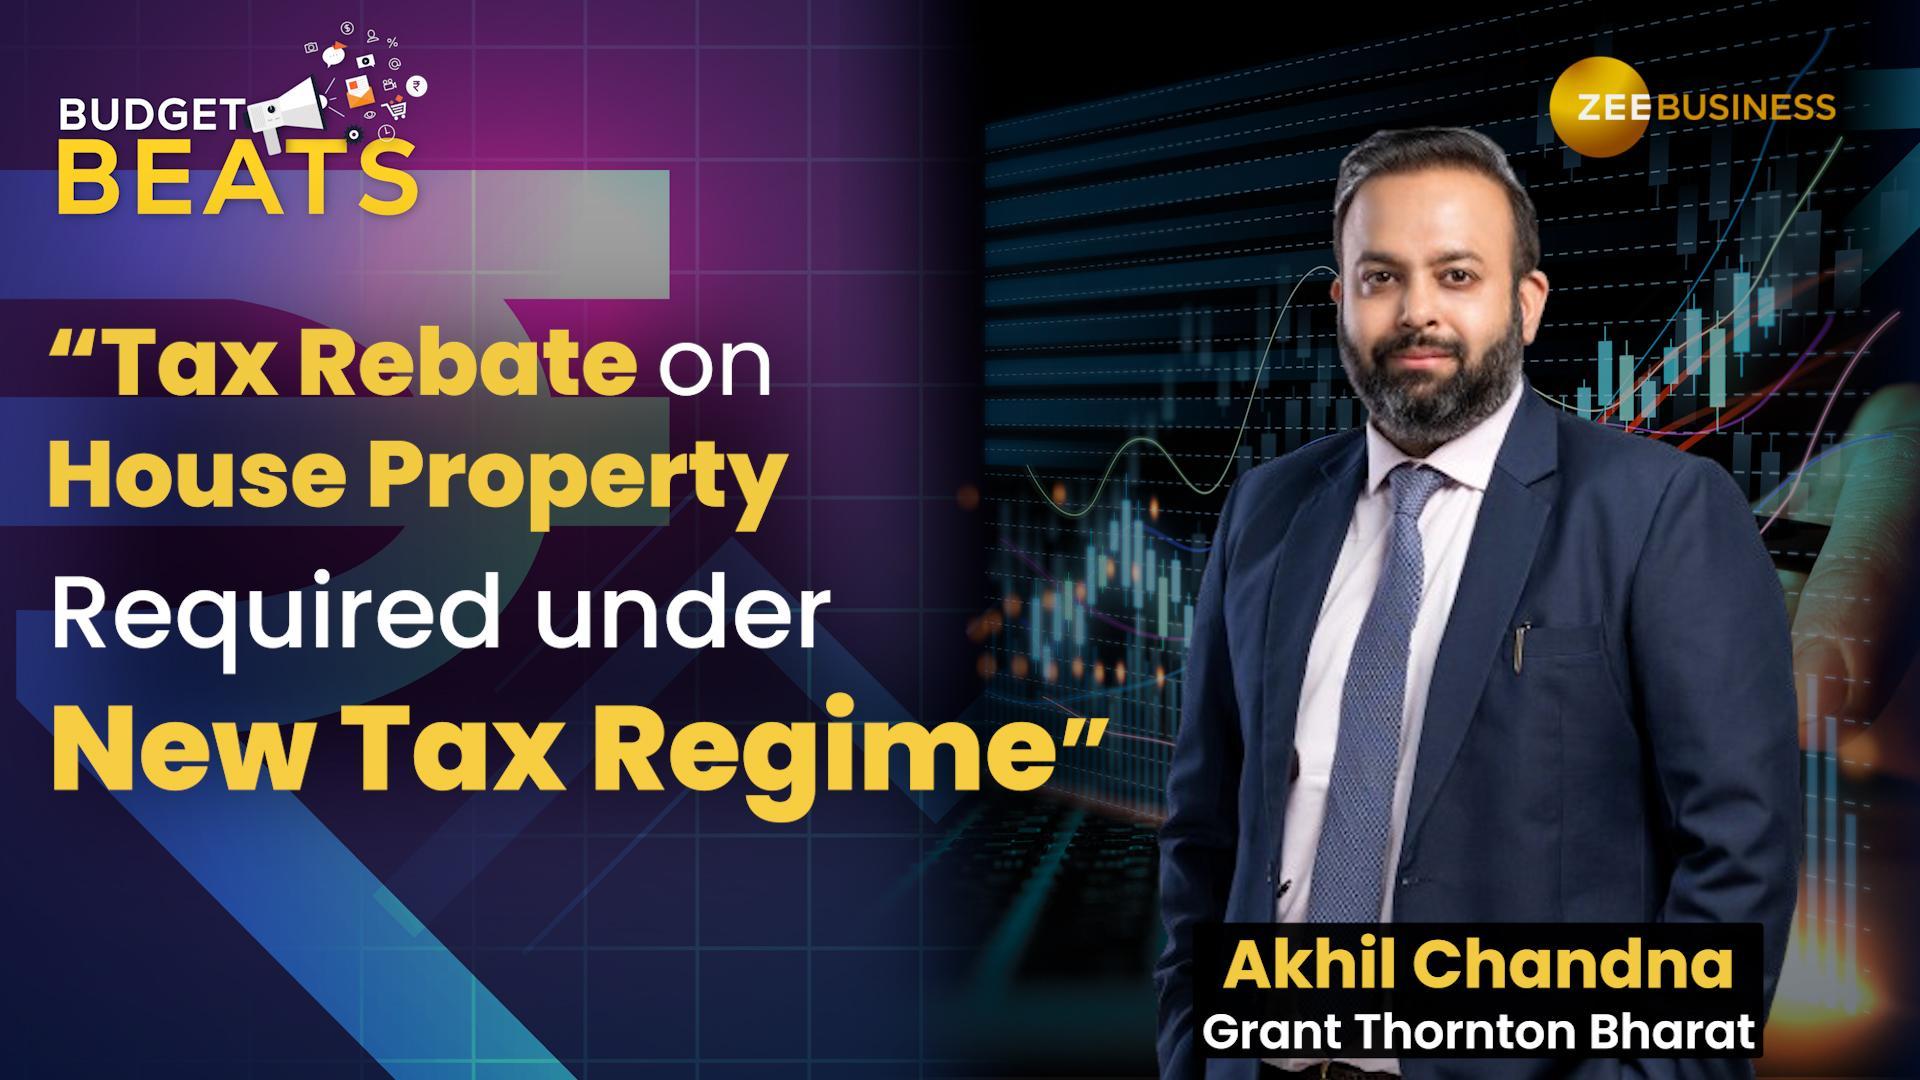 Budget 2024: Grant Thornton Bharat’s Akhil Chandna on Expected Tax Rebates In The Upcoming Budget 